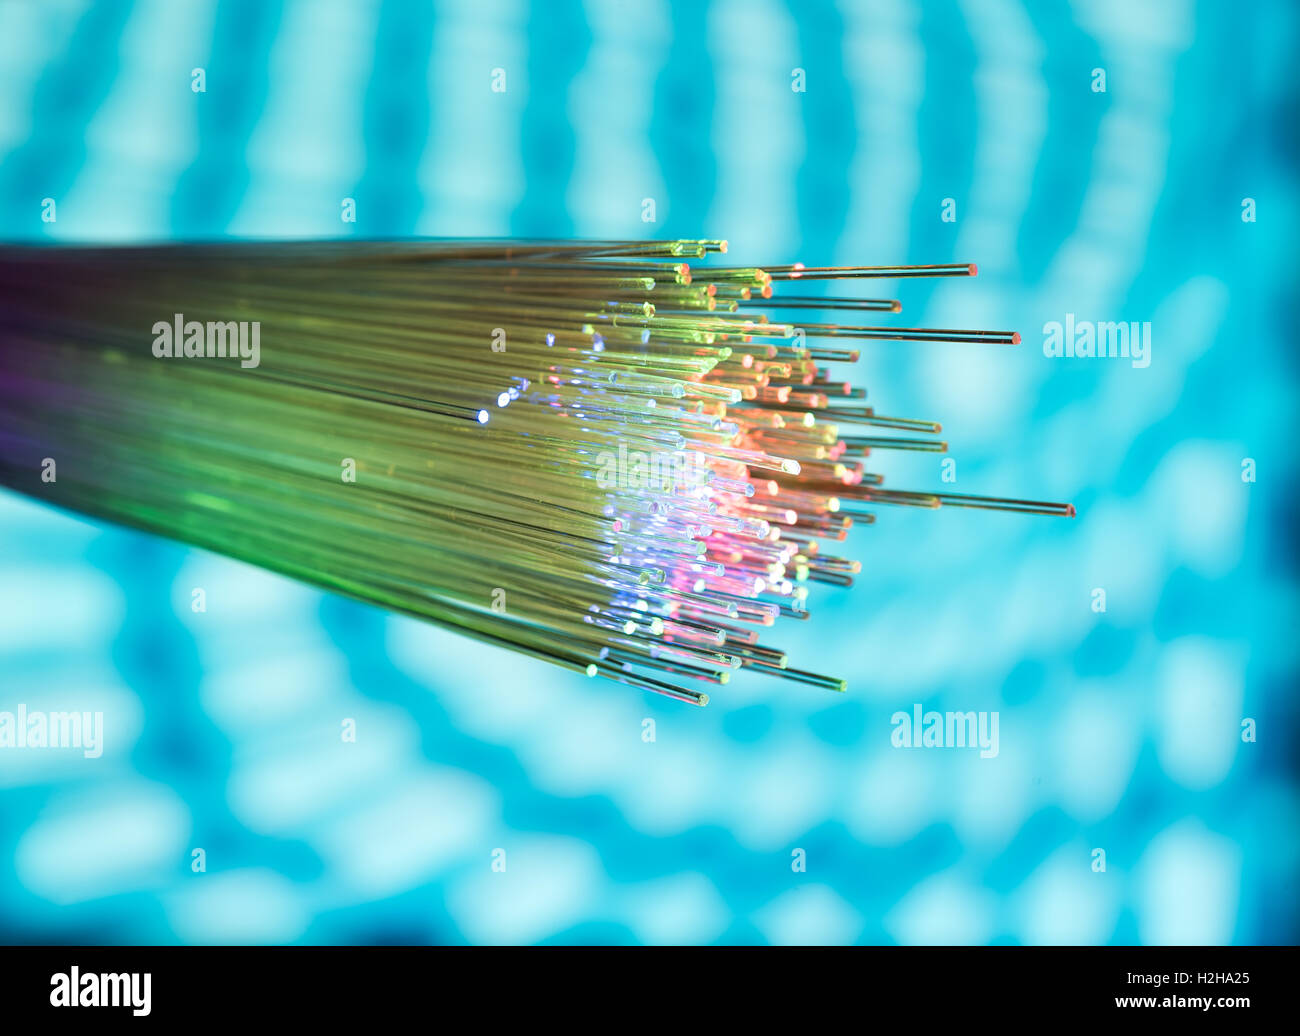 fiber optical network cable Stock Photo